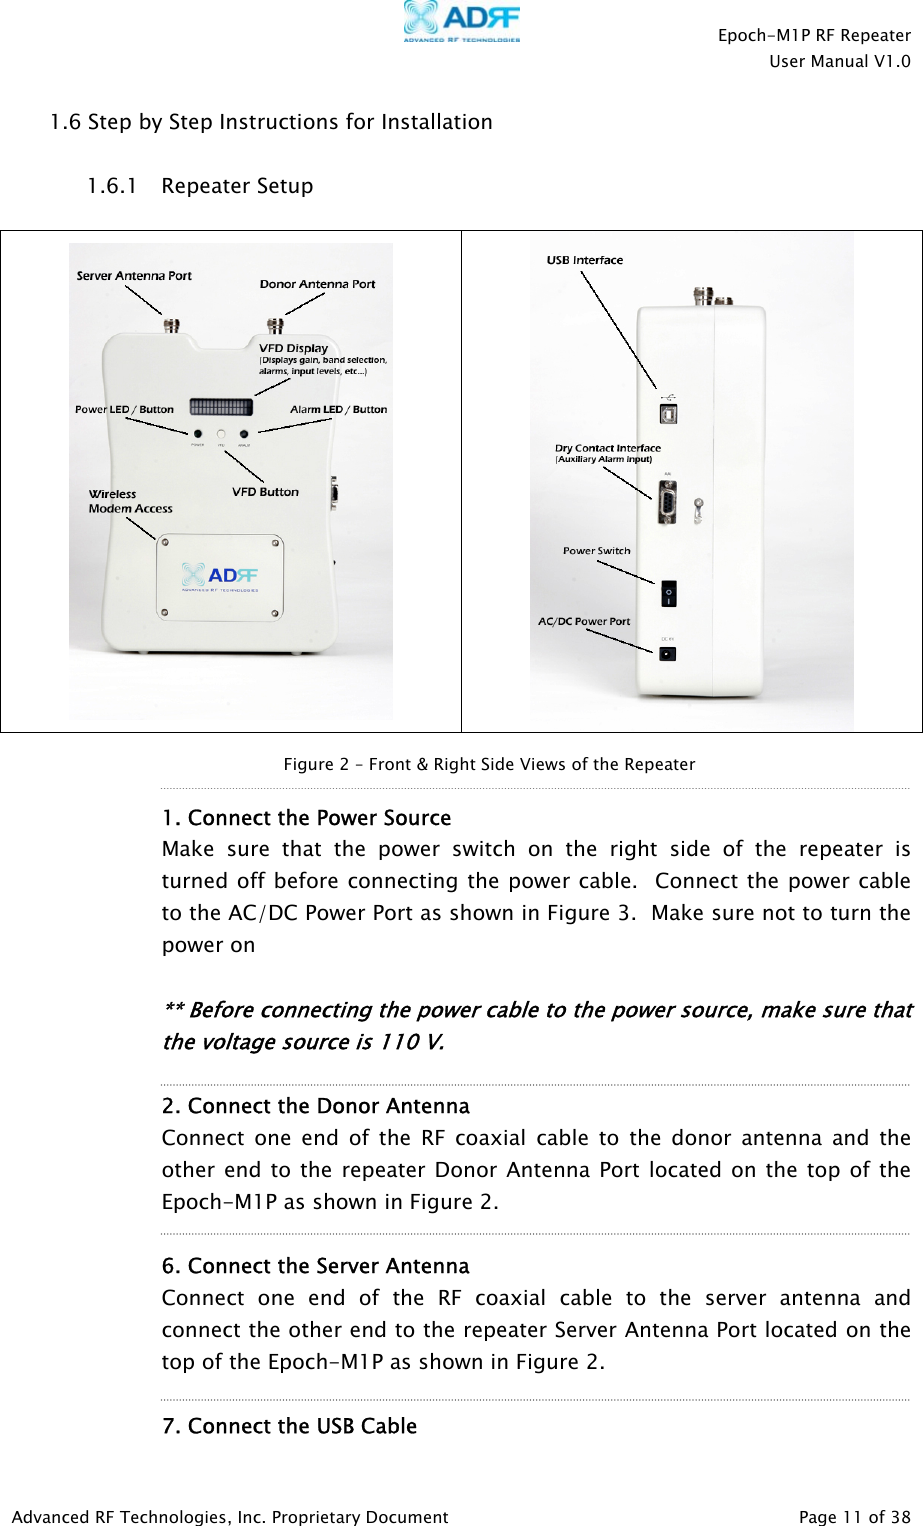    Epoch-M1P RF Repeater  User Manual V1.0  1.6 Step by Step Instructions for Installation  Repeater Setup   1.6.1    Figure 2 – Front &amp; Right Side Views of the Repeater  1. Connect the Power Source  Make sure that the power switch on the right side of the repeater is turned off before connecting the power cable.  Connect the power cable to the AC/DC Power Port as shown in Figure 3.  Make sure not to turn the power on      ** Before connecting the power cable to the power source, make sure that the voltage source is 110 V.       2. Connect the Donor Antenna Connect one end of the RF coaxial cable to the donor antenna and the other end to the repeater Donor Antenna Port located on the top of the Epoch-M1P as shown in Figure 2.    6. Connect the Server Antenna Connect one end of the RF coaxial cable to the server antenna and connect the other end to the repeater Server Antenna Port located on the top of the Epoch-M1P as shown in Figure 2.    7. Connect the USB Cable  Advanced RF Technologies, Inc. Proprietary Document   Page 11 of 38  